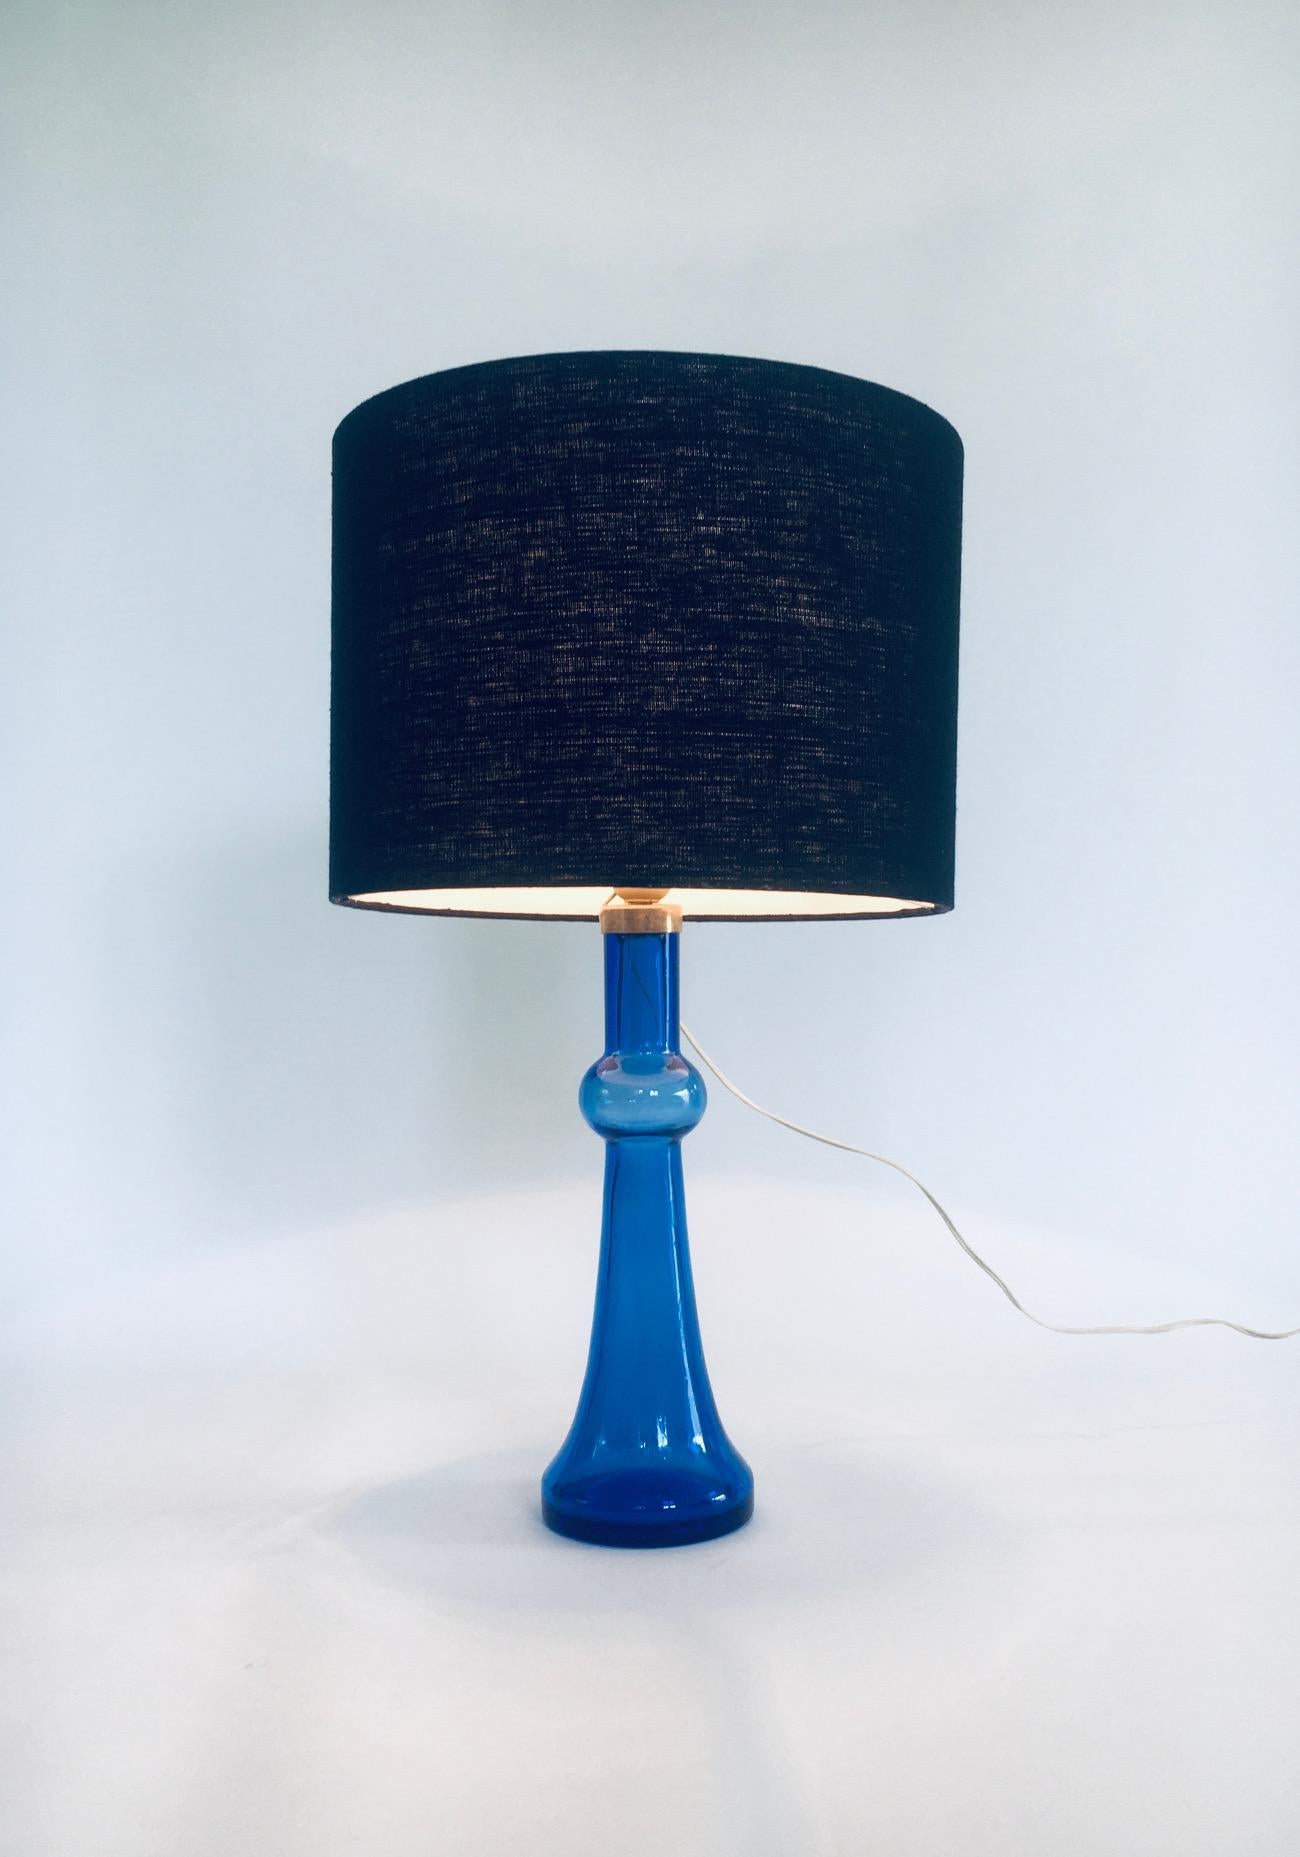 Midcentury Design Blue Glass Table Lamp by Nanny Still for Raak, 1960's For Sale 2